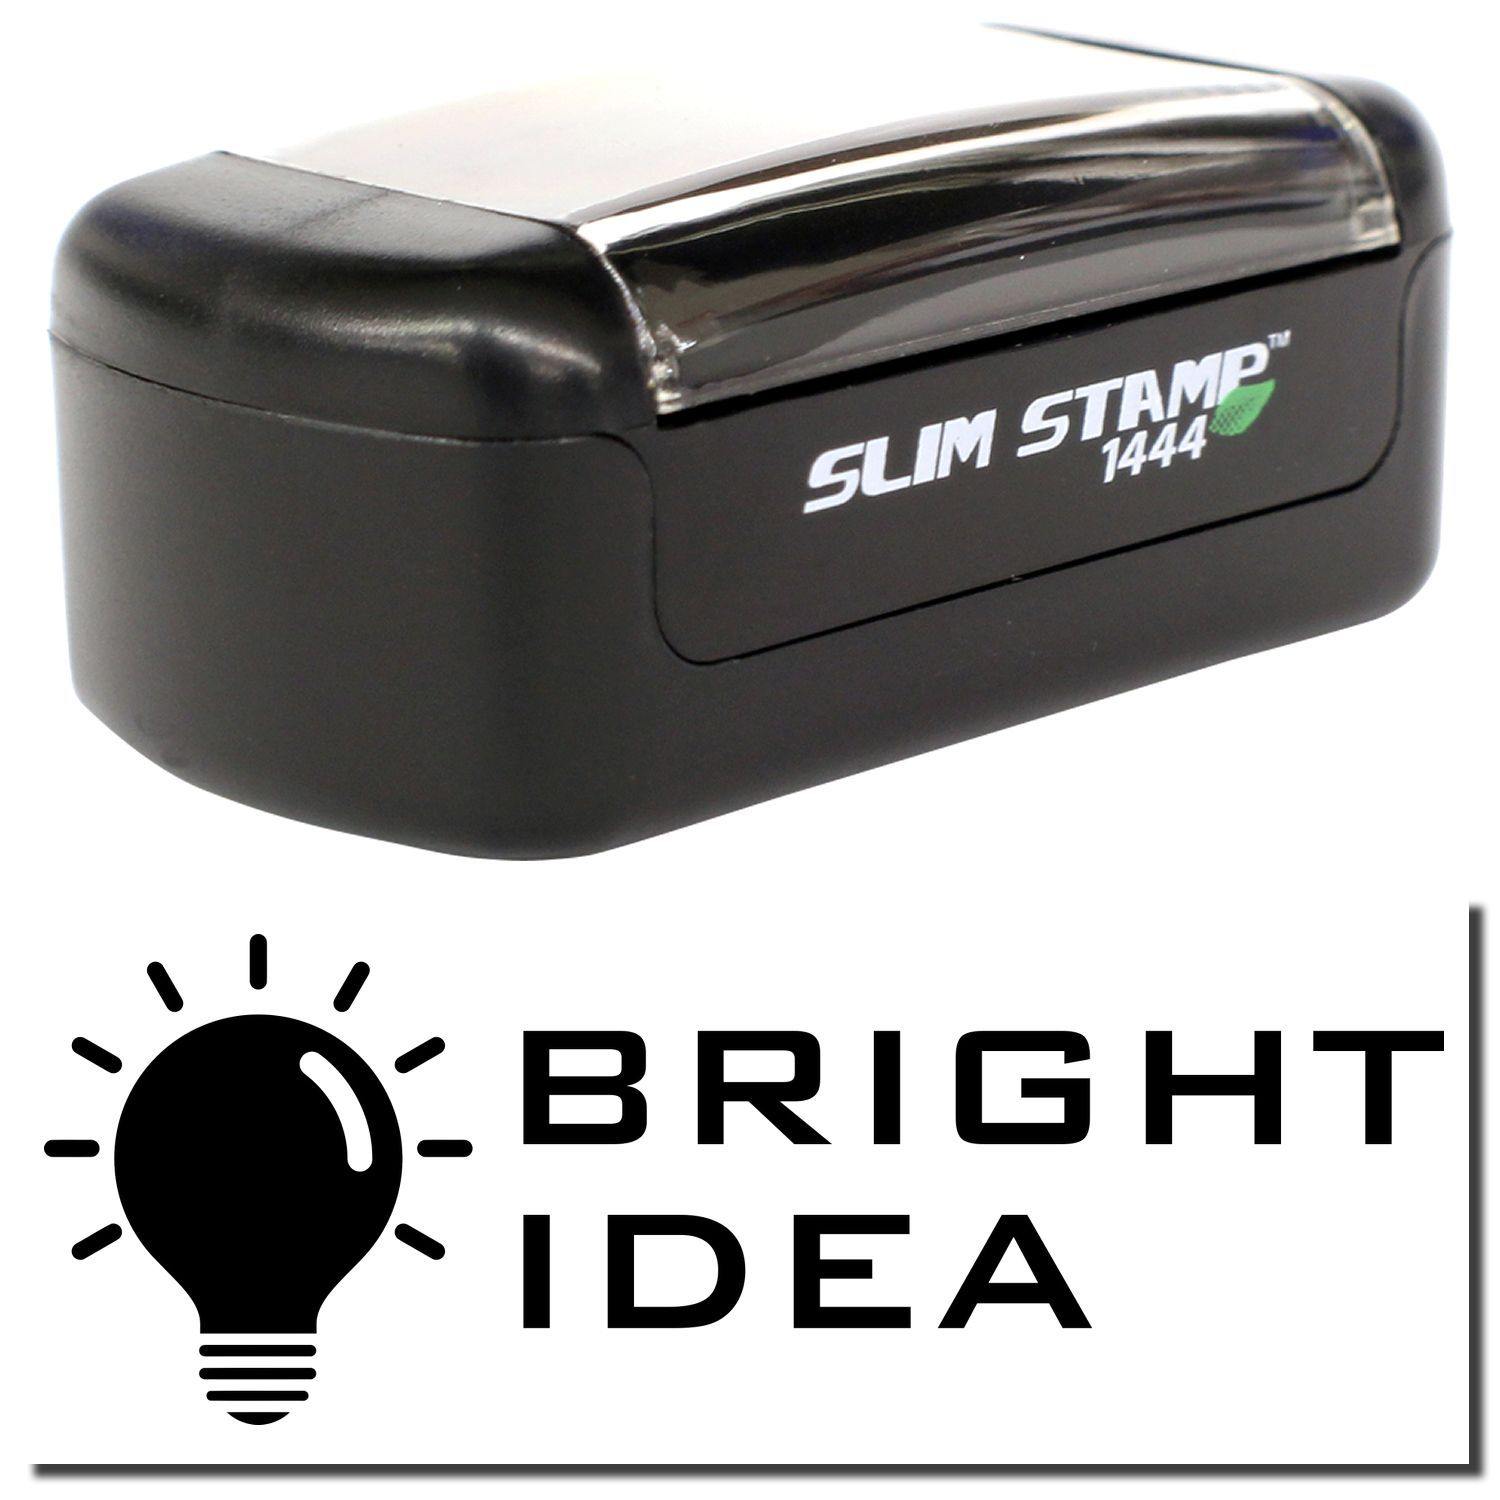 A stock office pre-inked stamp with a stamped image showing how the text "BRIGHT IDEA" in a tech-style font with an image of a bright lightbulb on the left is displayed after stamping.